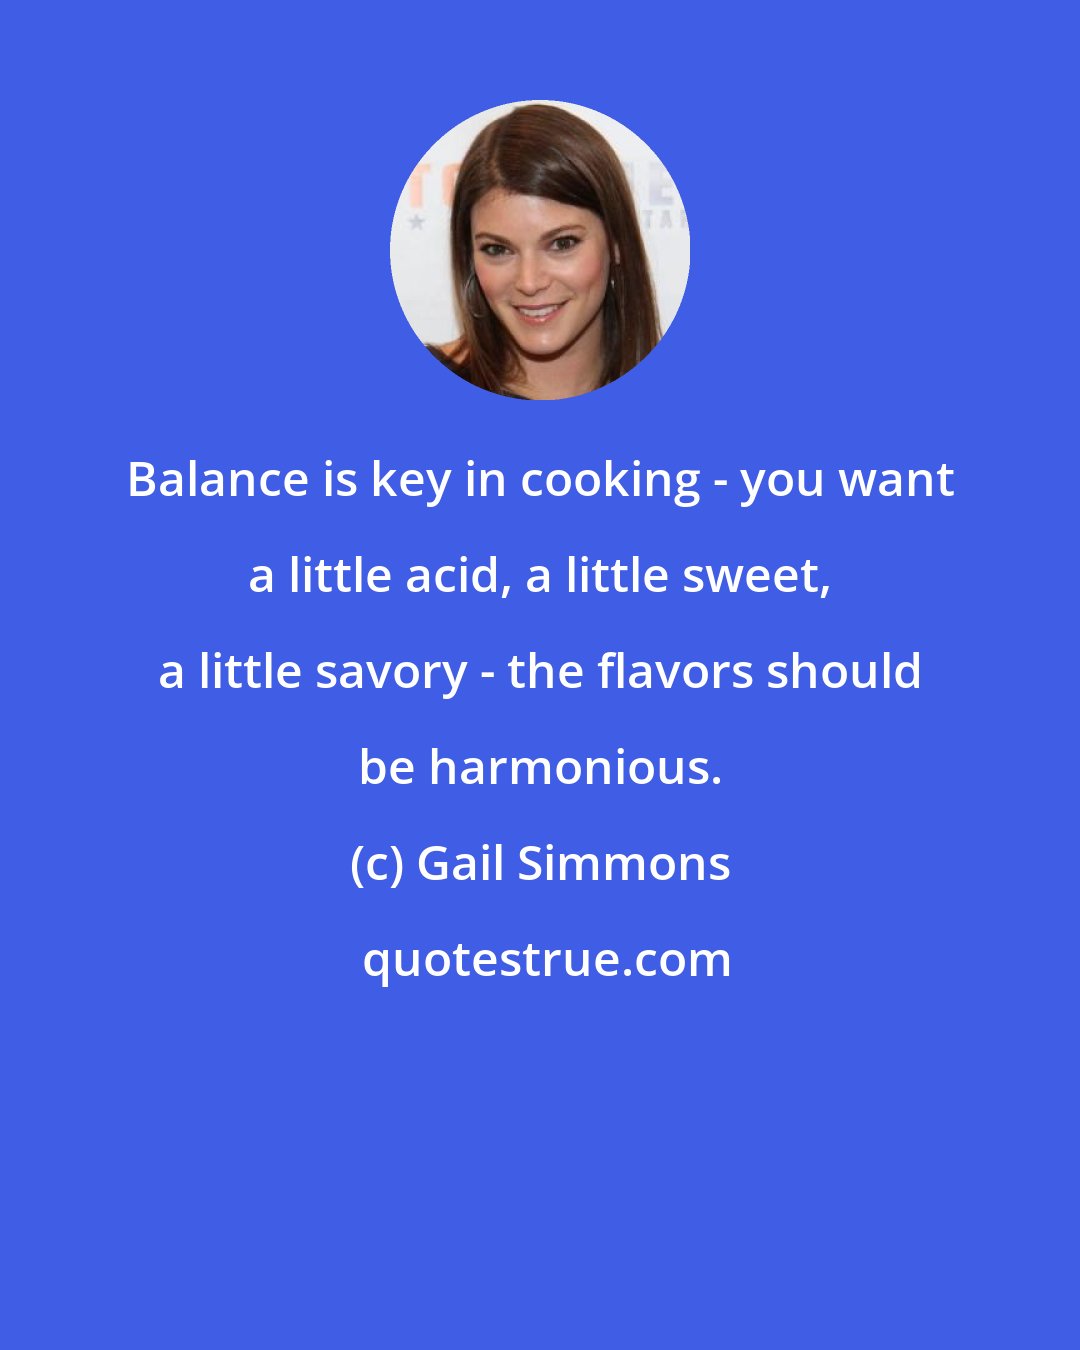 Gail Simmons: Balance is key in cooking - you want a little acid, a little sweet, a little savory - the flavors should be harmonious.